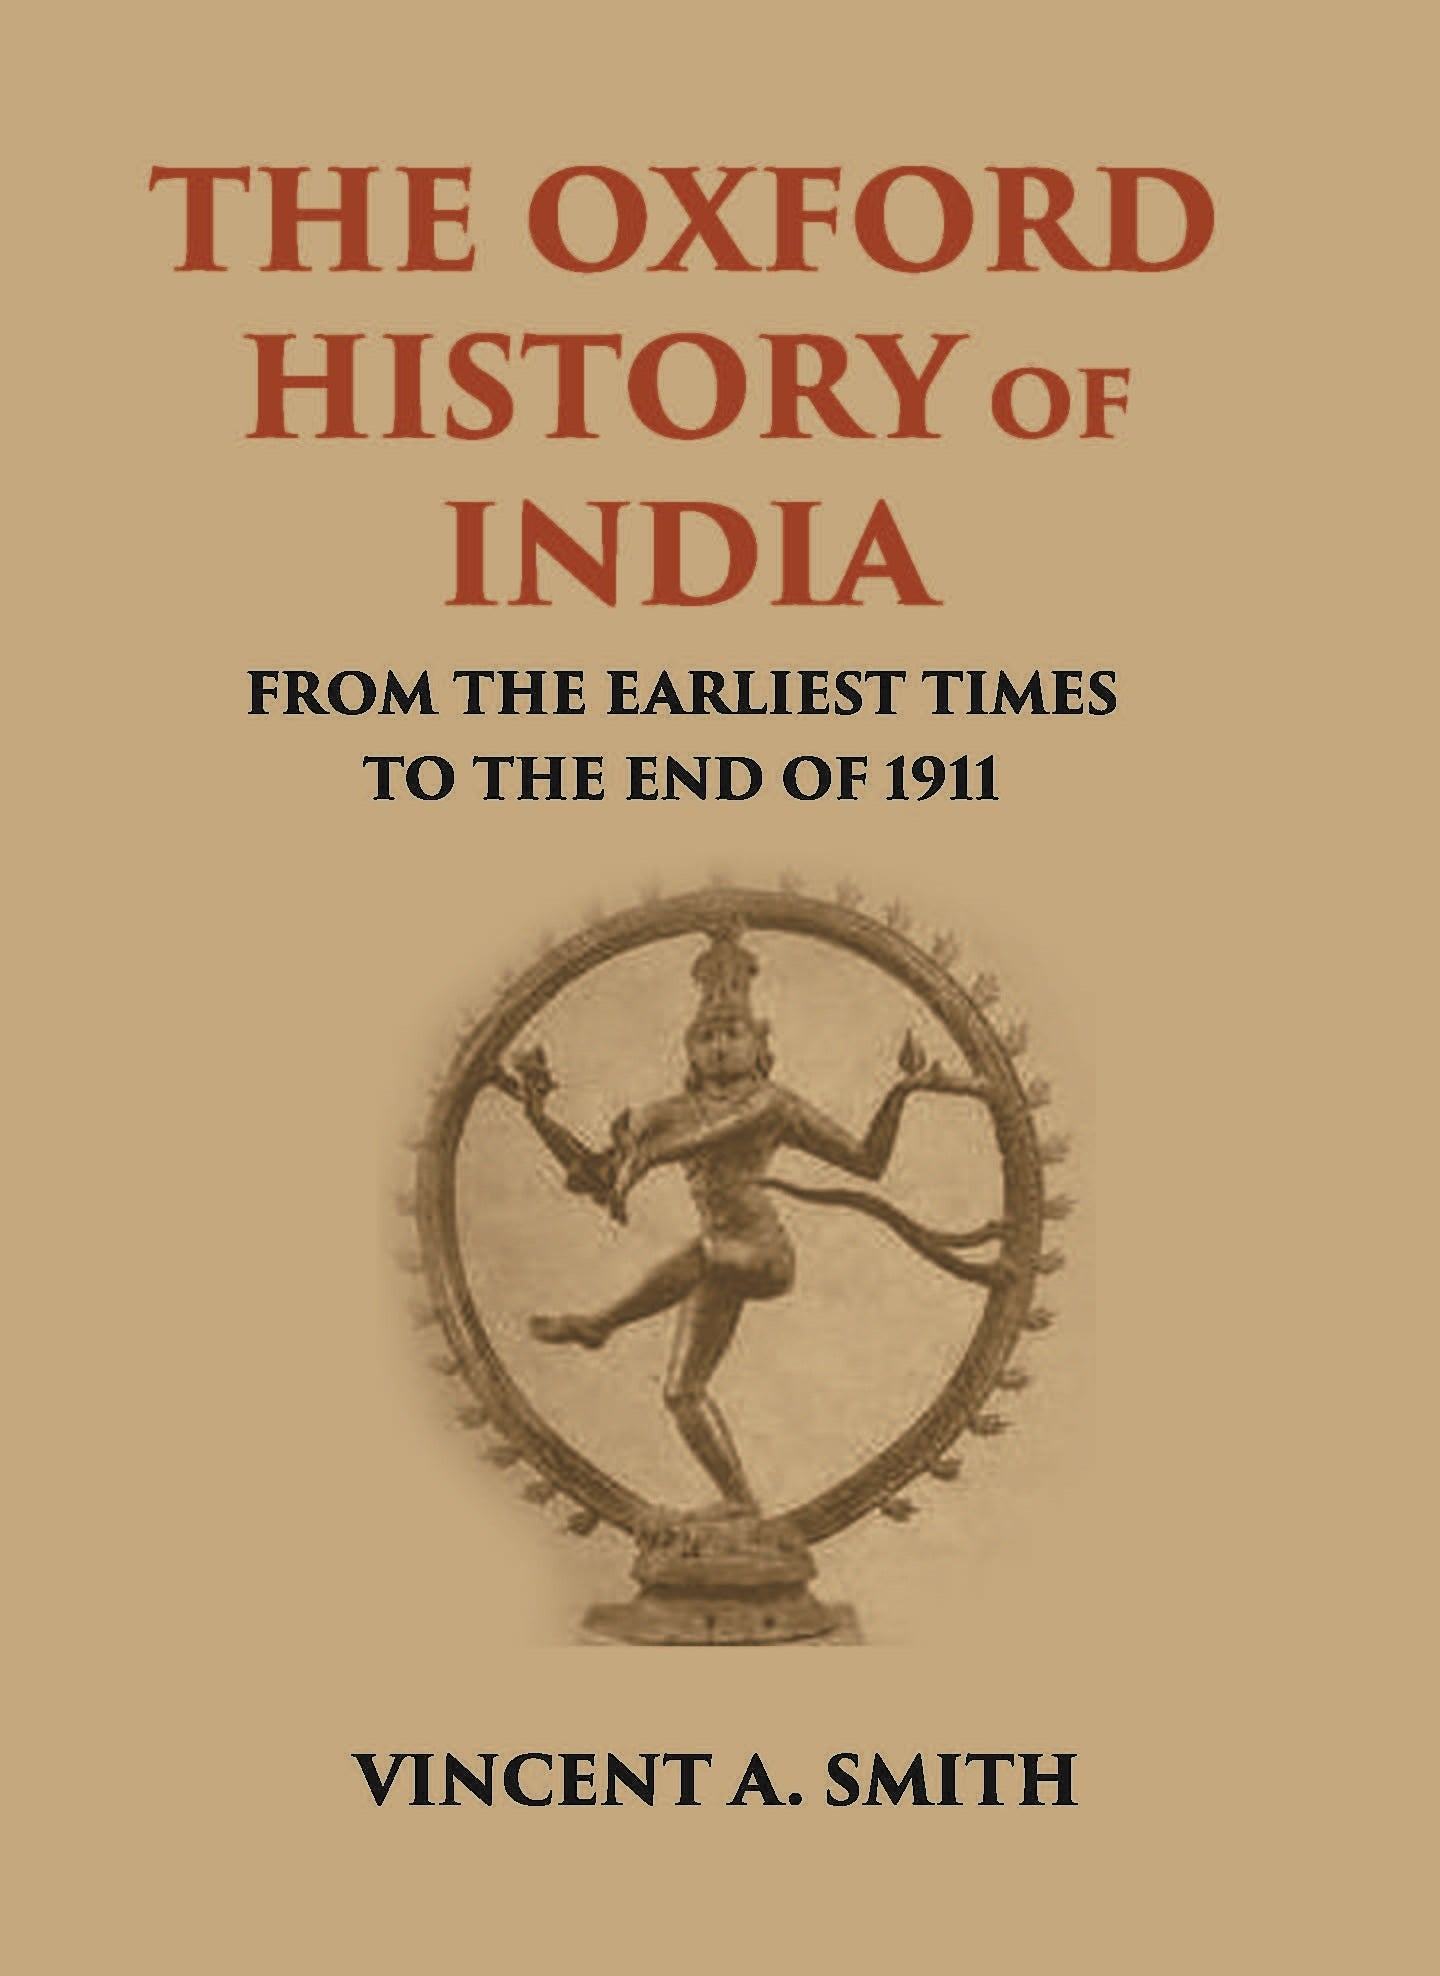 THE OXFORD HISTORY OF INDIA